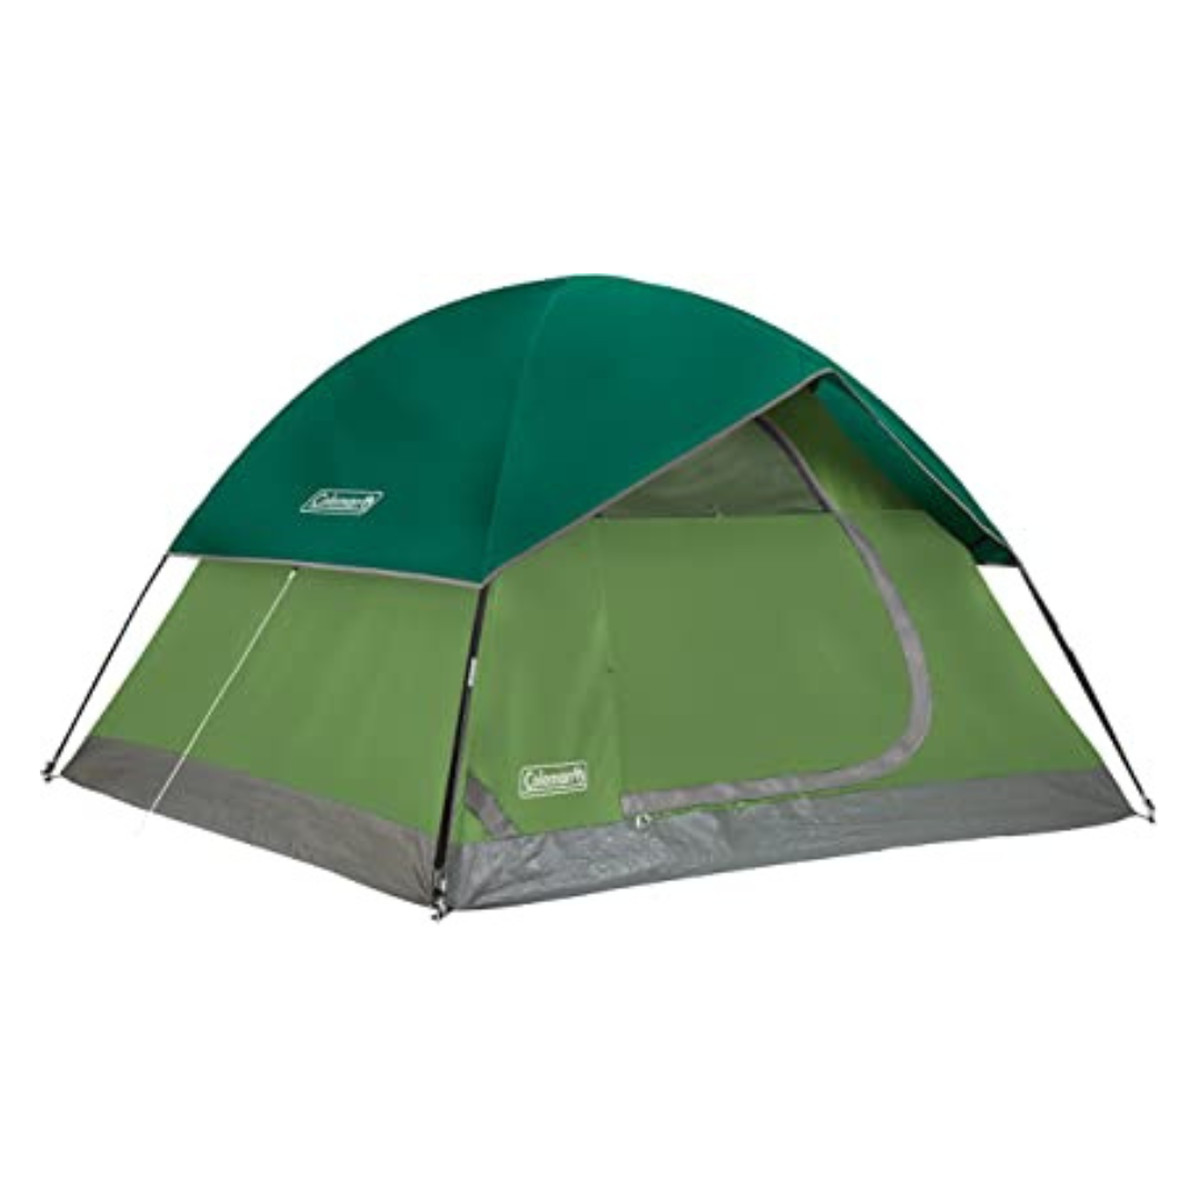 Best tent for water protection: Coleman Sundome Tent